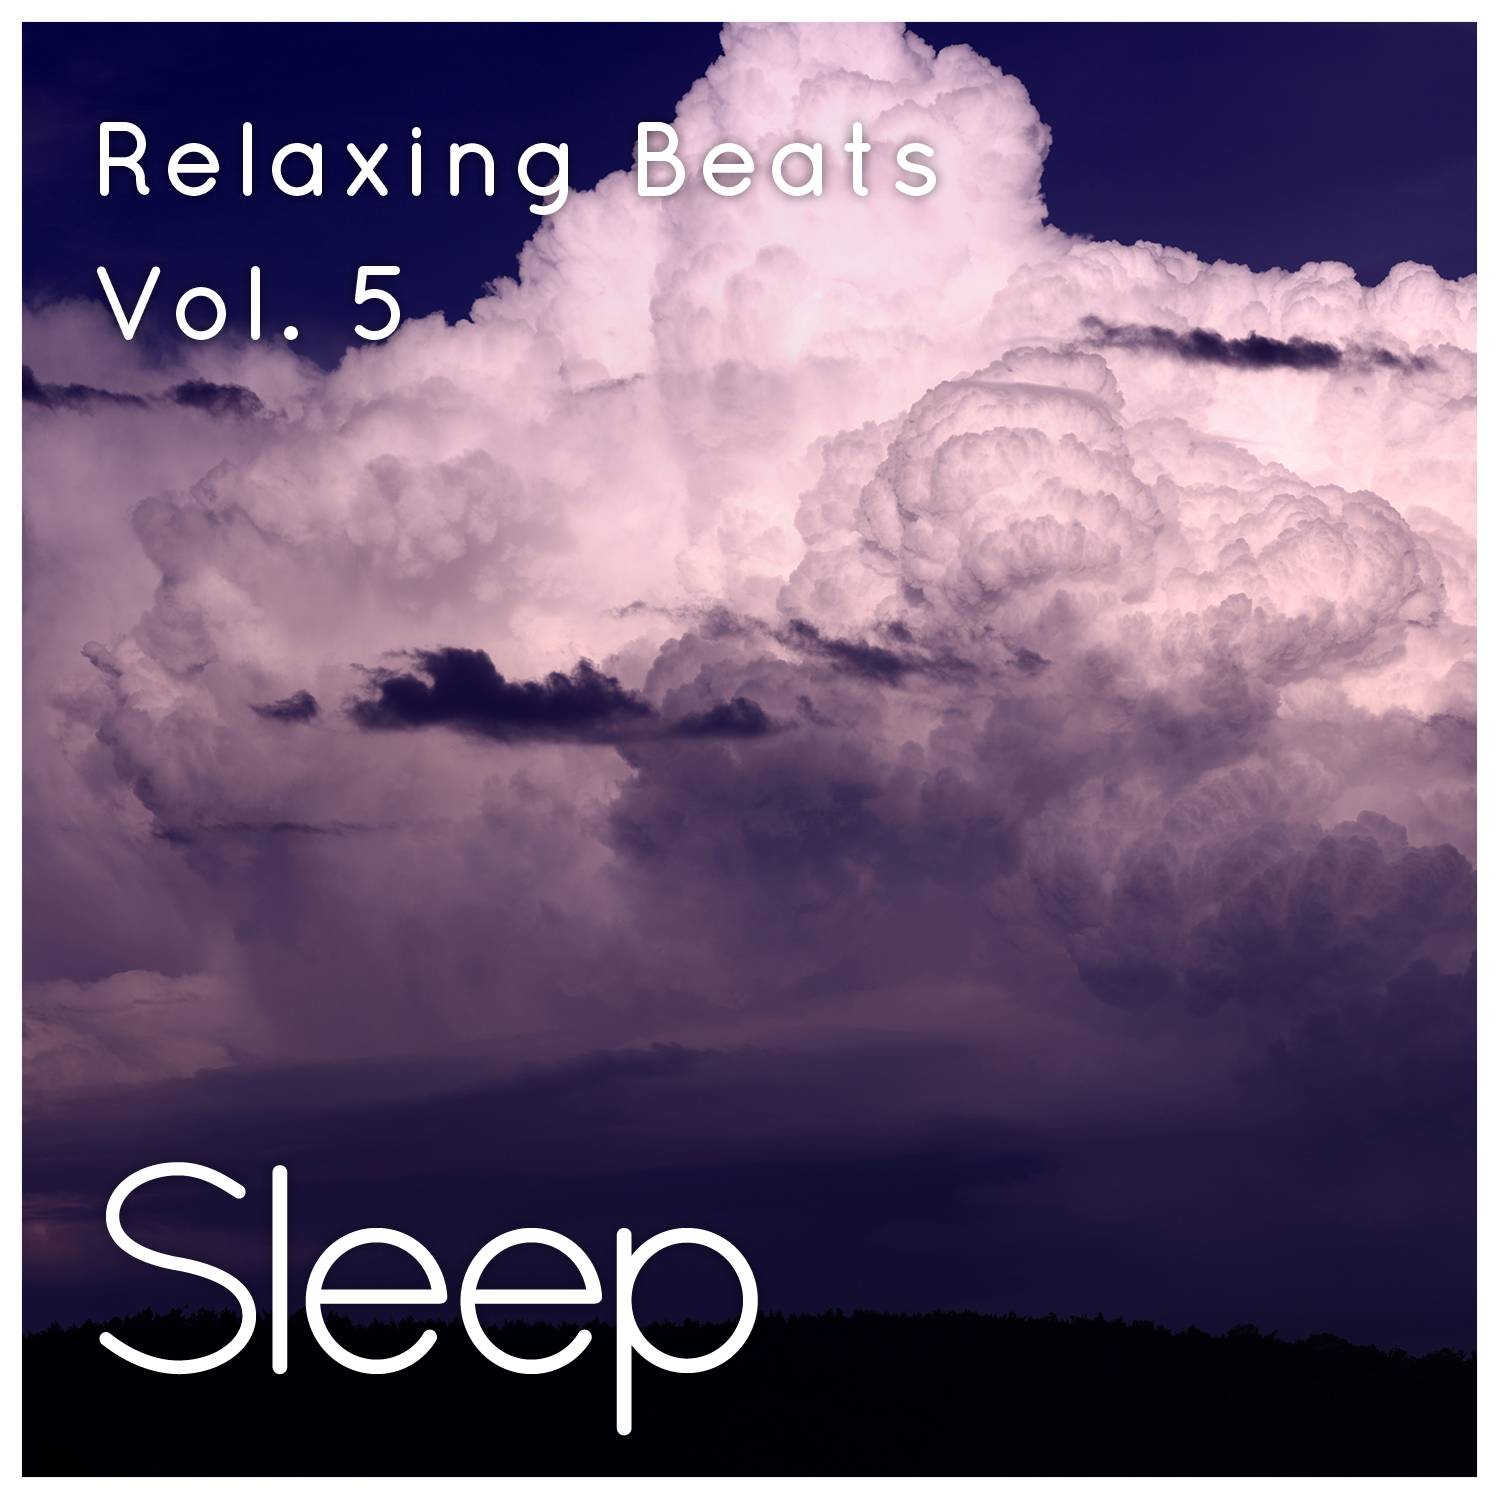 Relaxing Ambient Sleep Sounds, Pt. 23